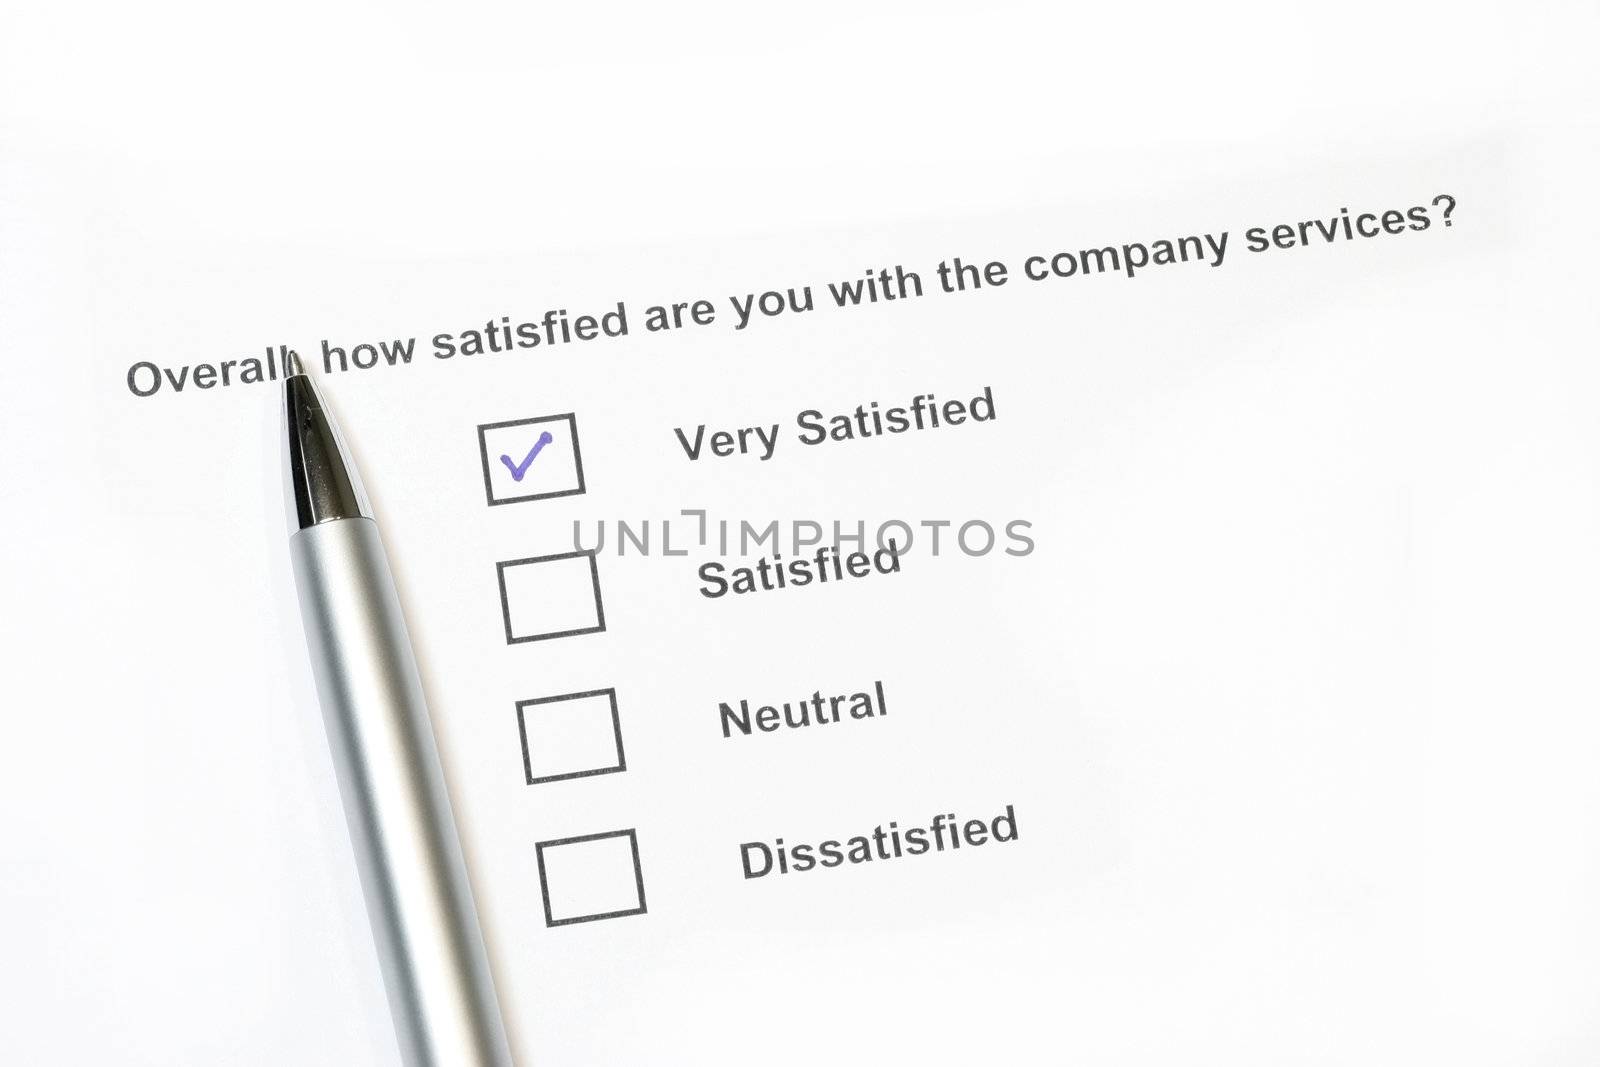 How satisfied are you survey by sacatani